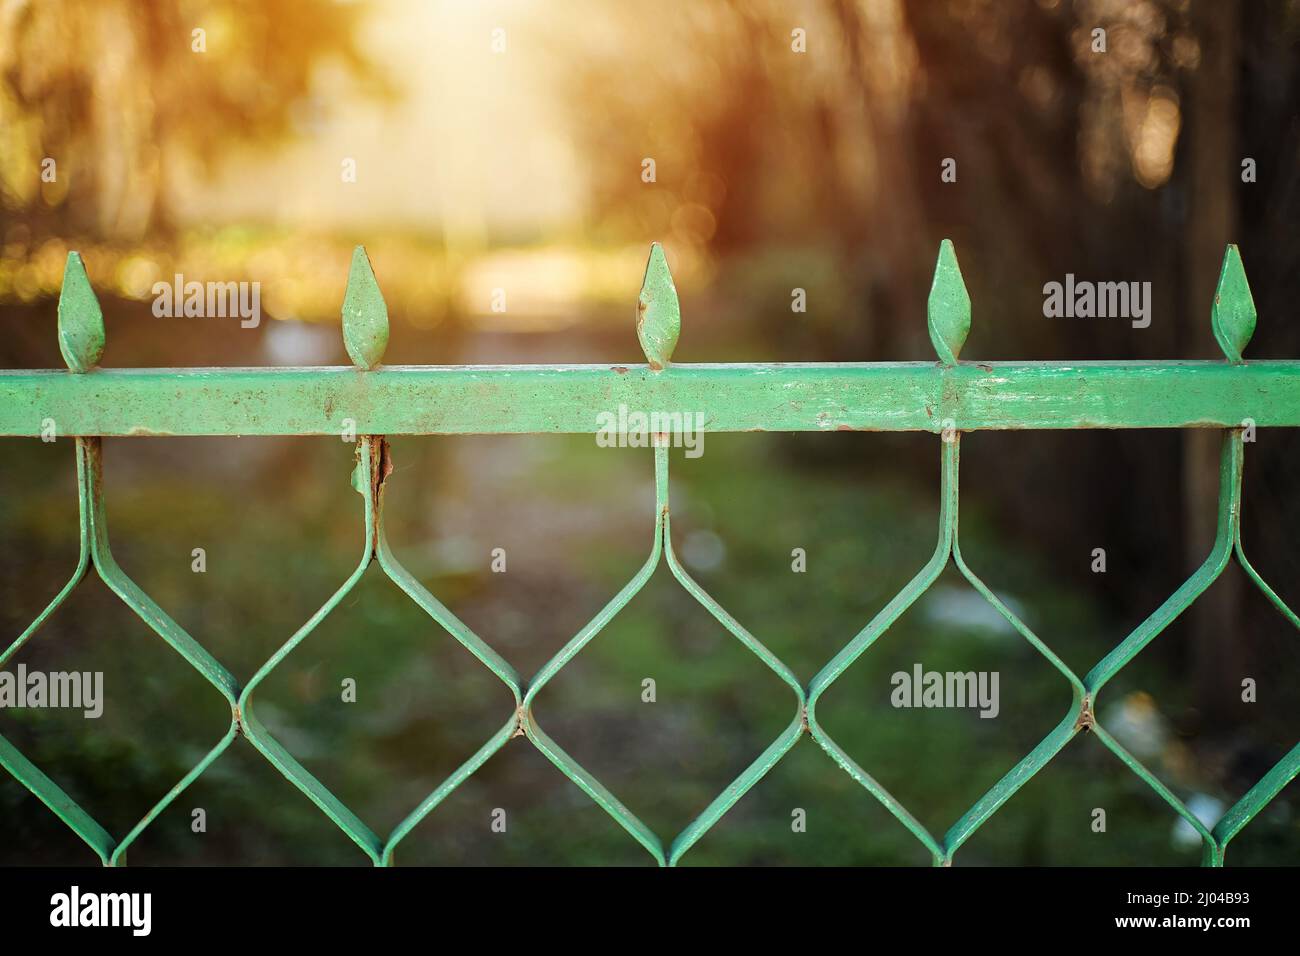 Old vintage metal gate with green chipping paint Stock Photo